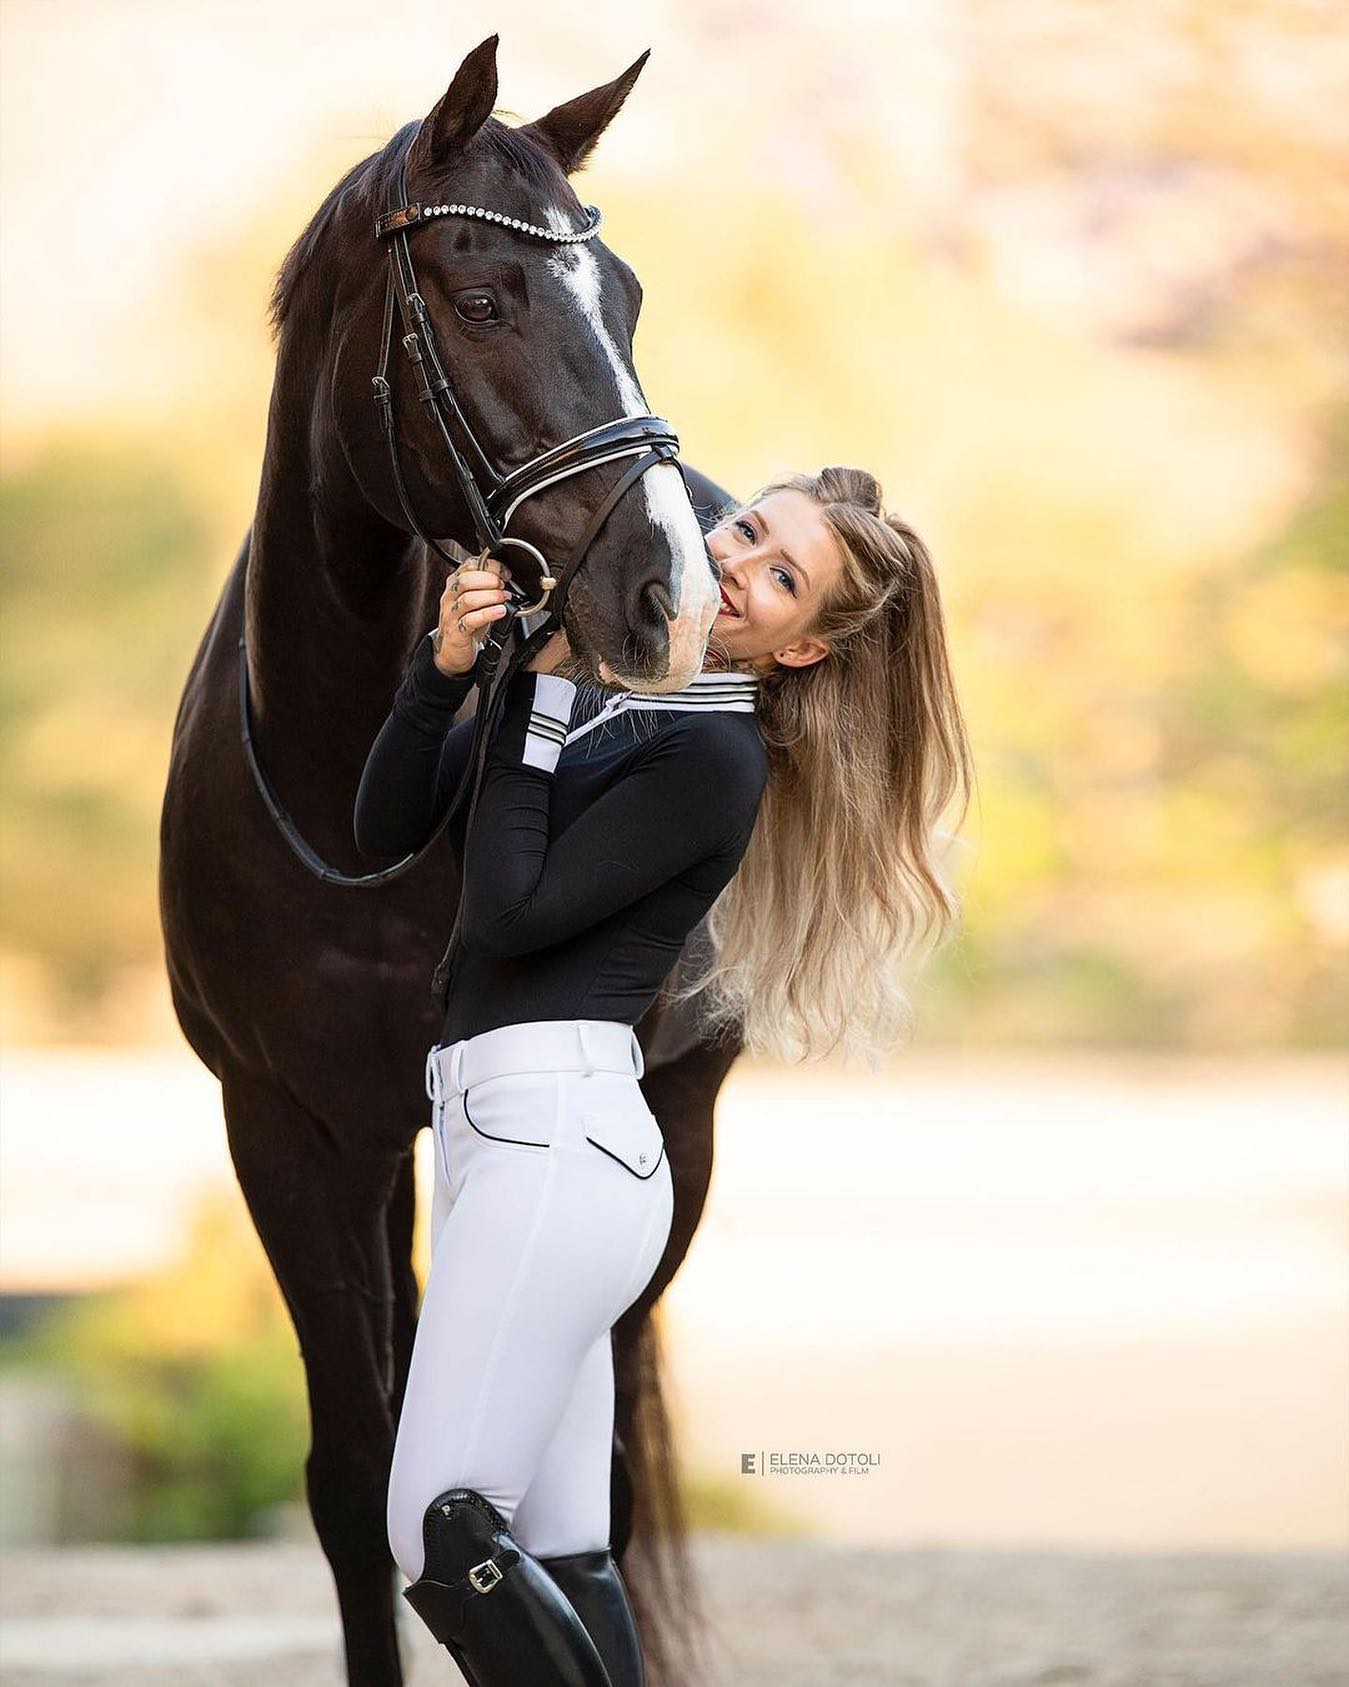 Either Holding or Leading a Horse 27213-either-holding-or-leading-a-horse.jpg